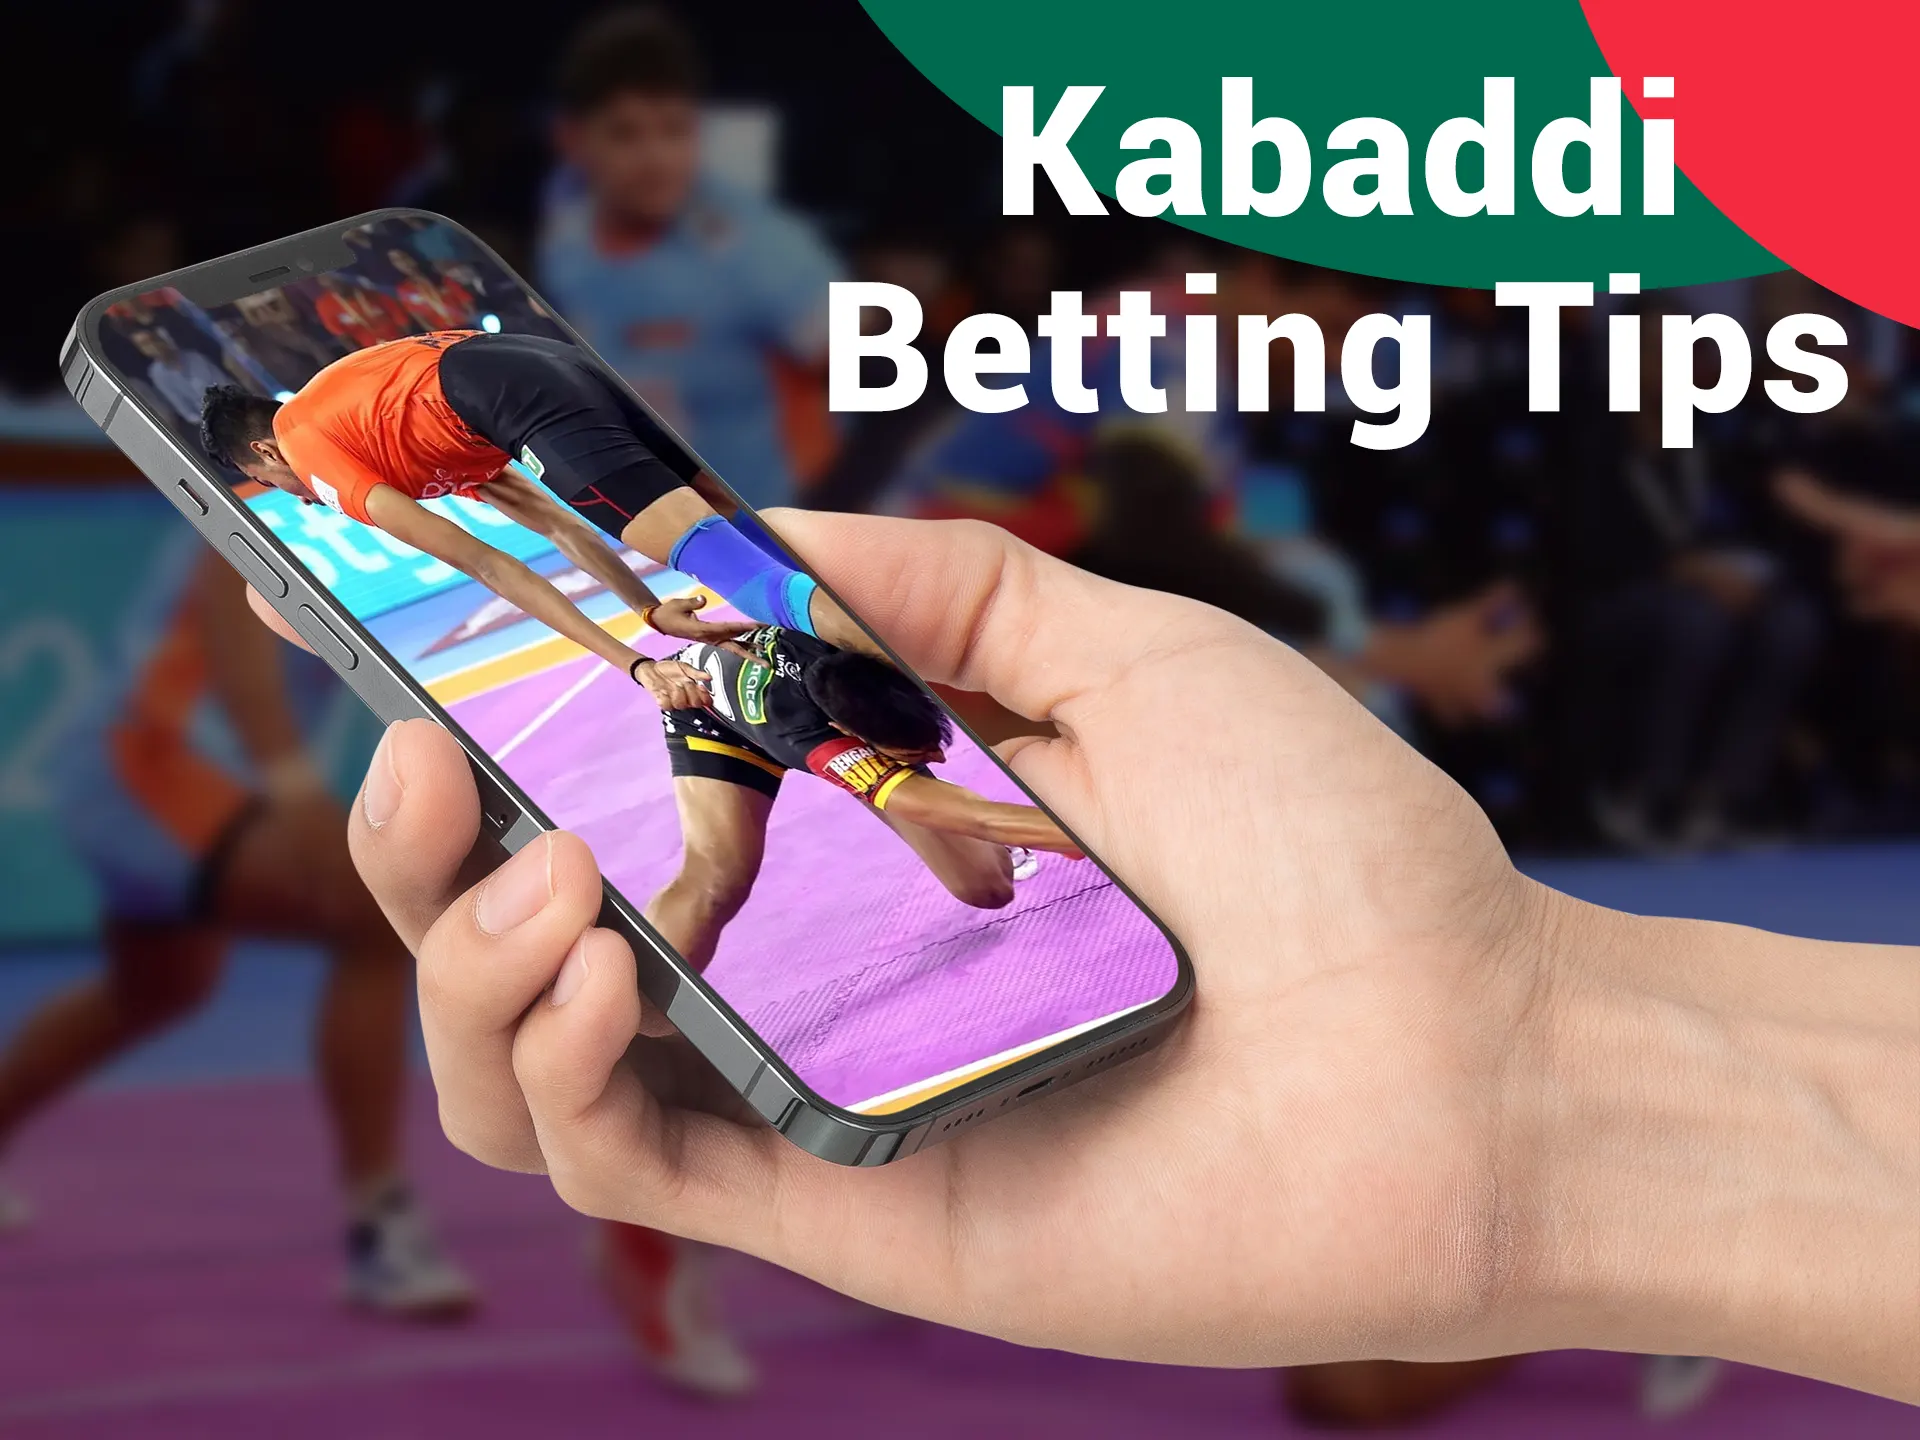 Try our kabaddi betting tips for improving your bet results.